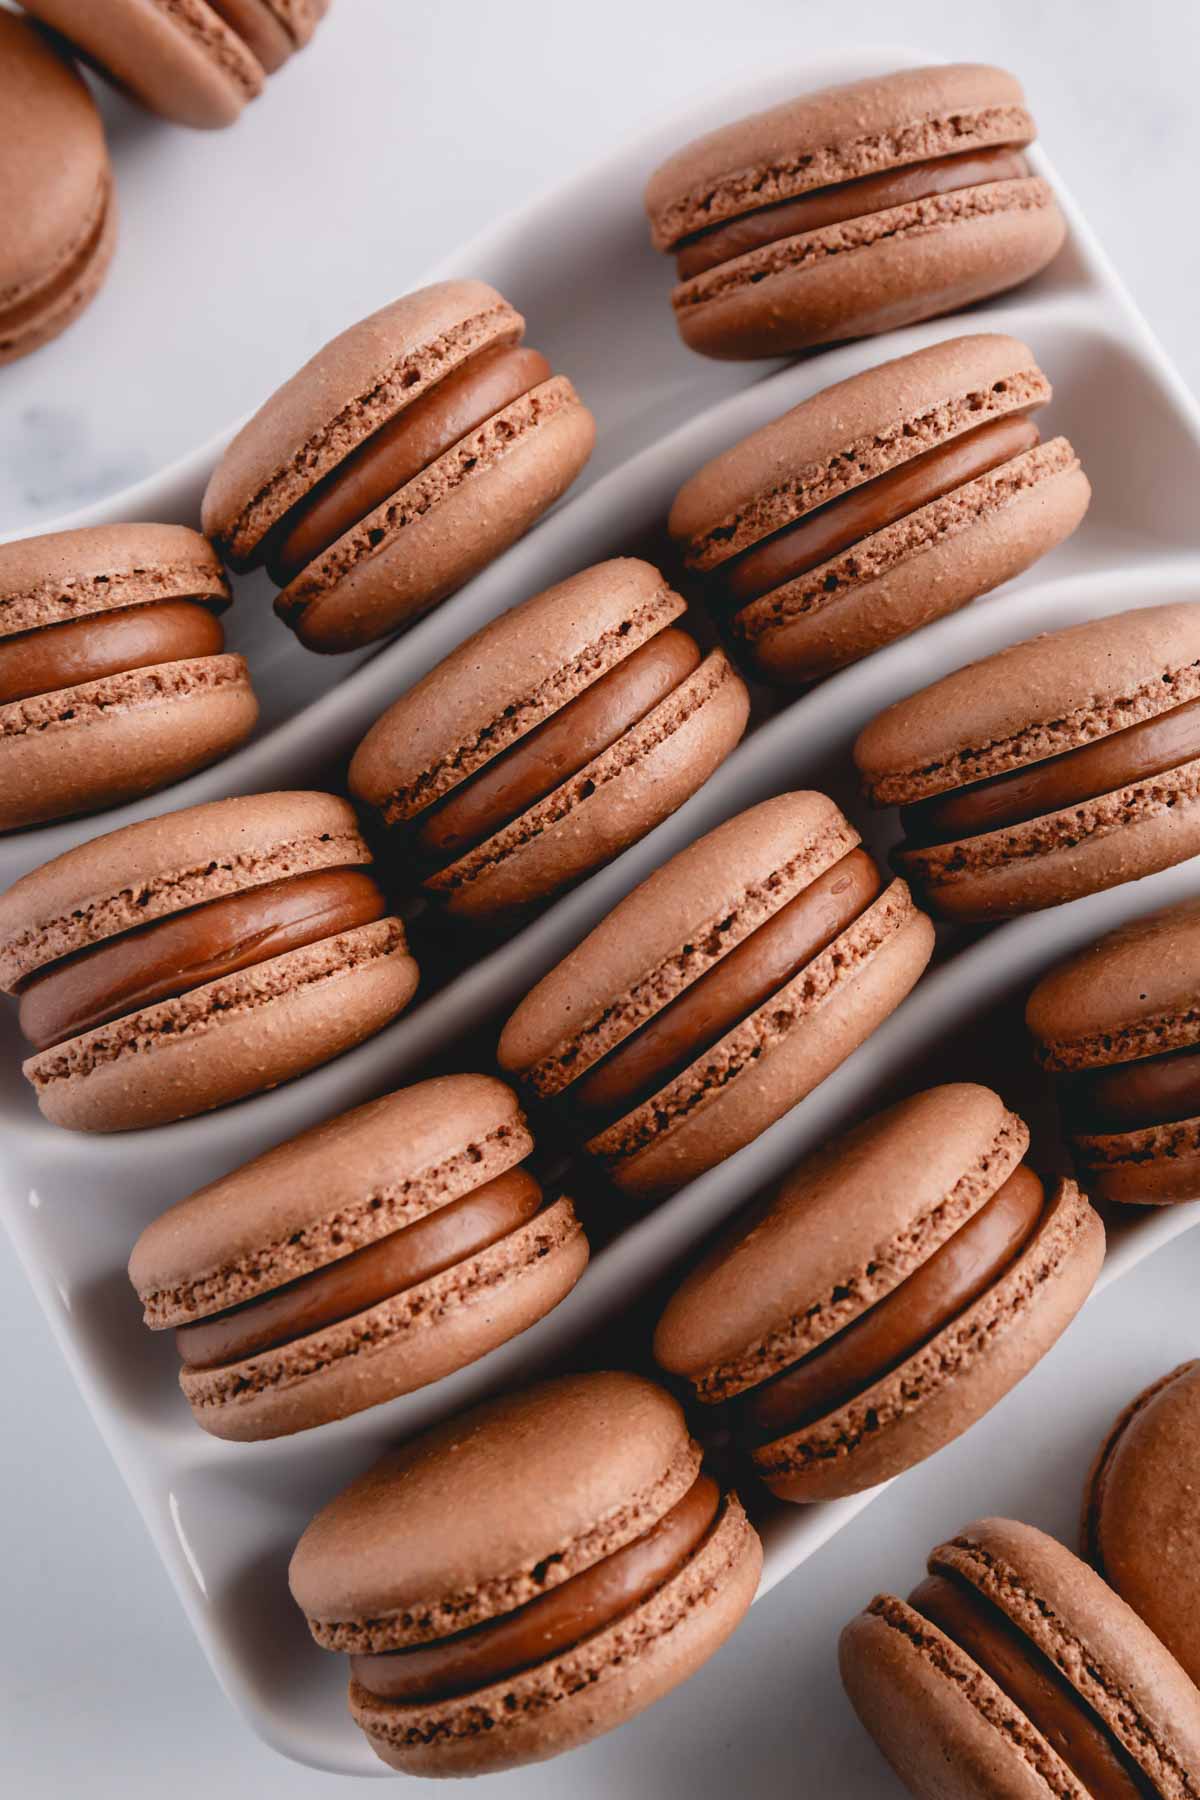 Chocolate macarons filled with chocolate filling in a white serving platter.